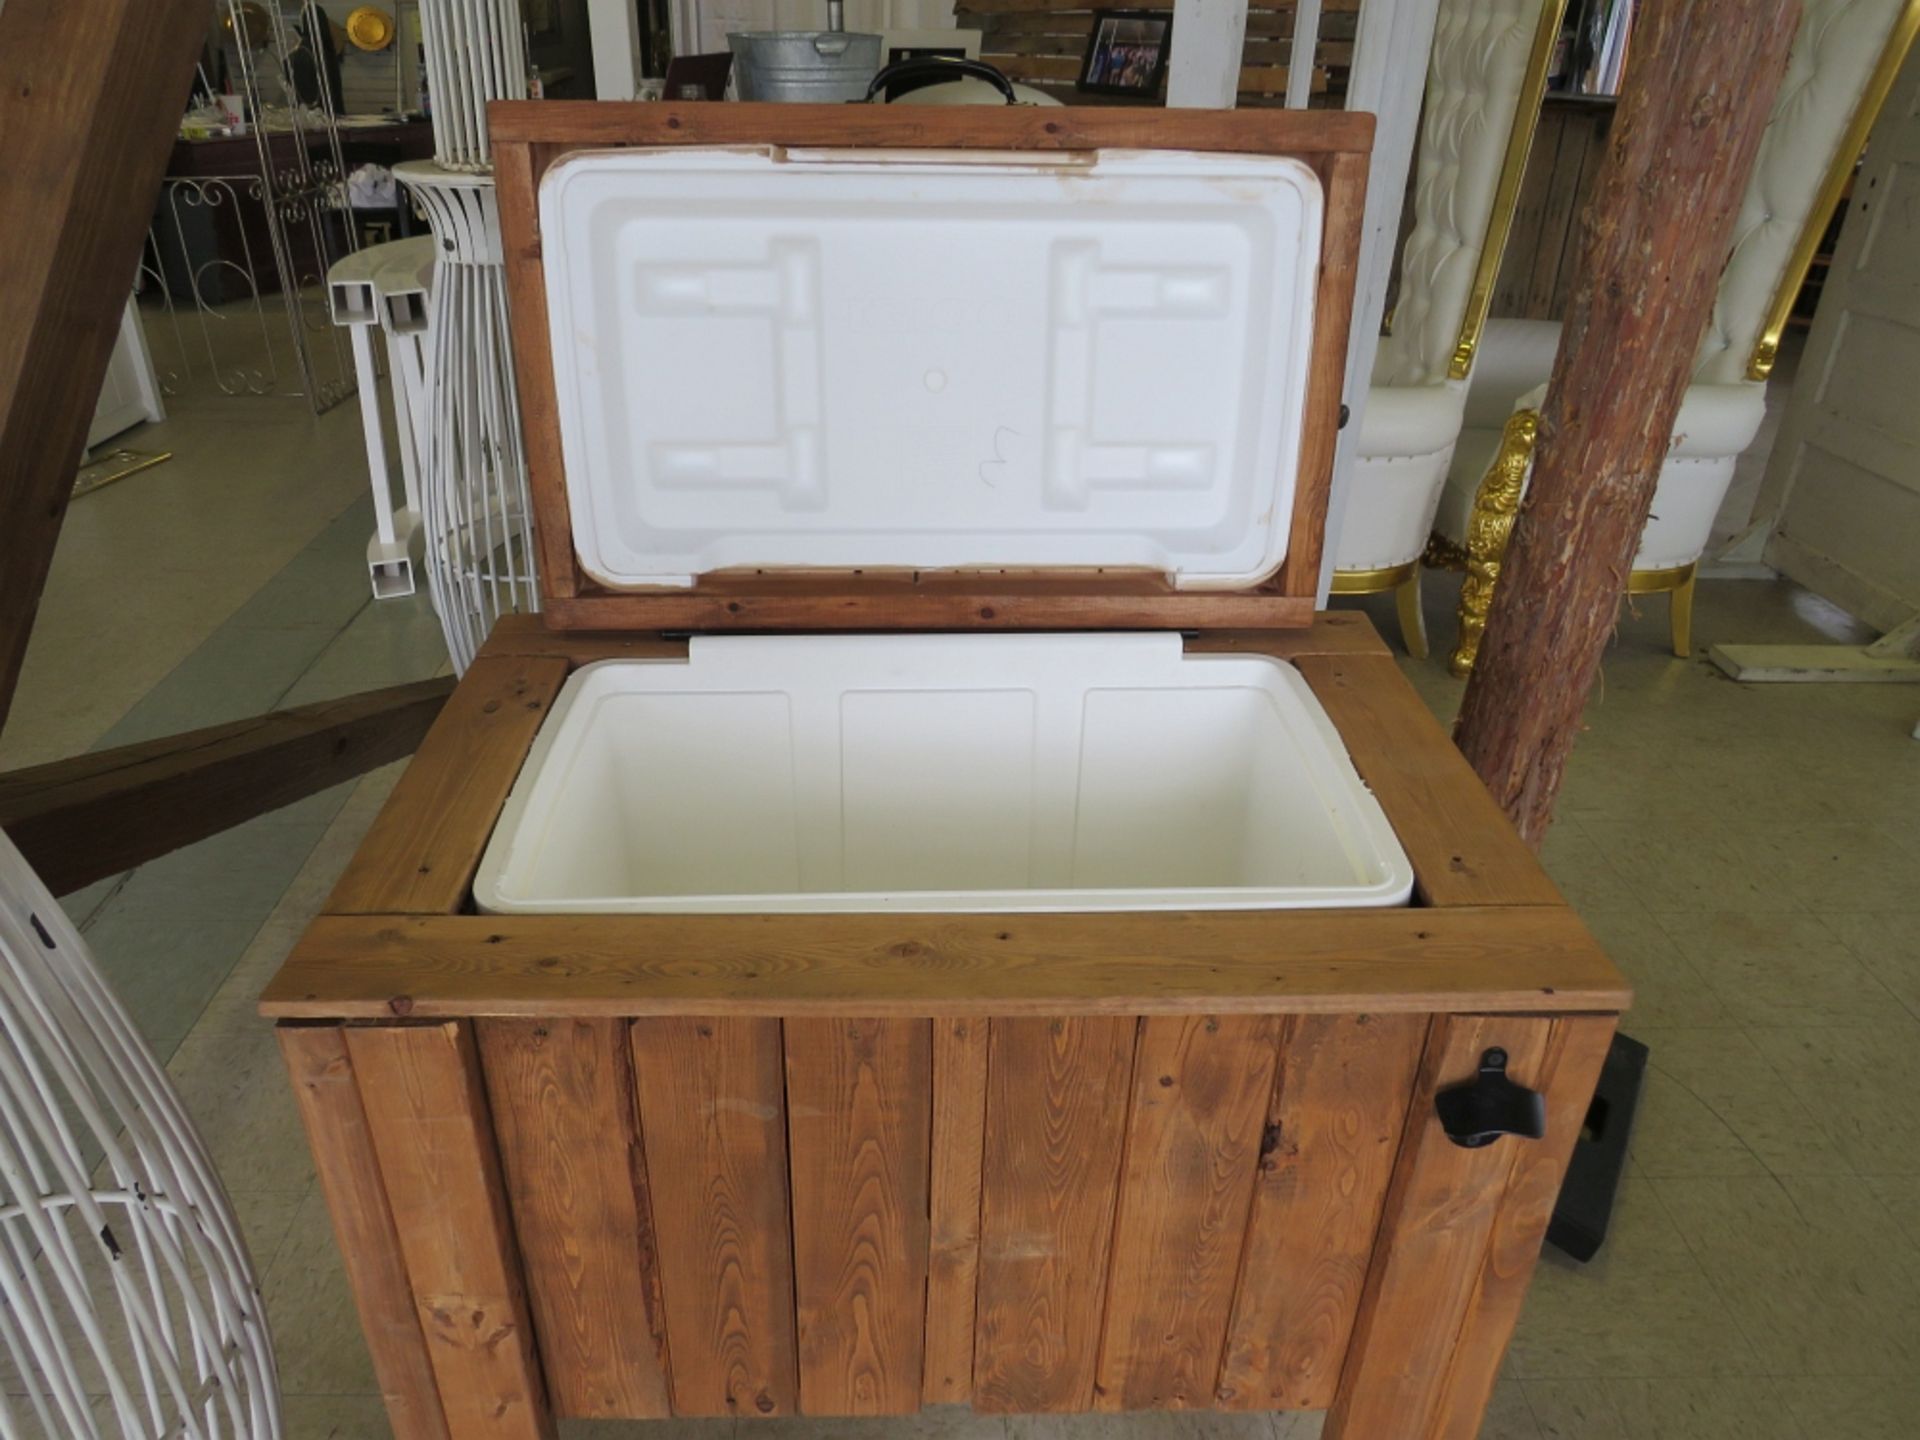 Rustic Wood Cooler (on legs) - Image 2 of 3